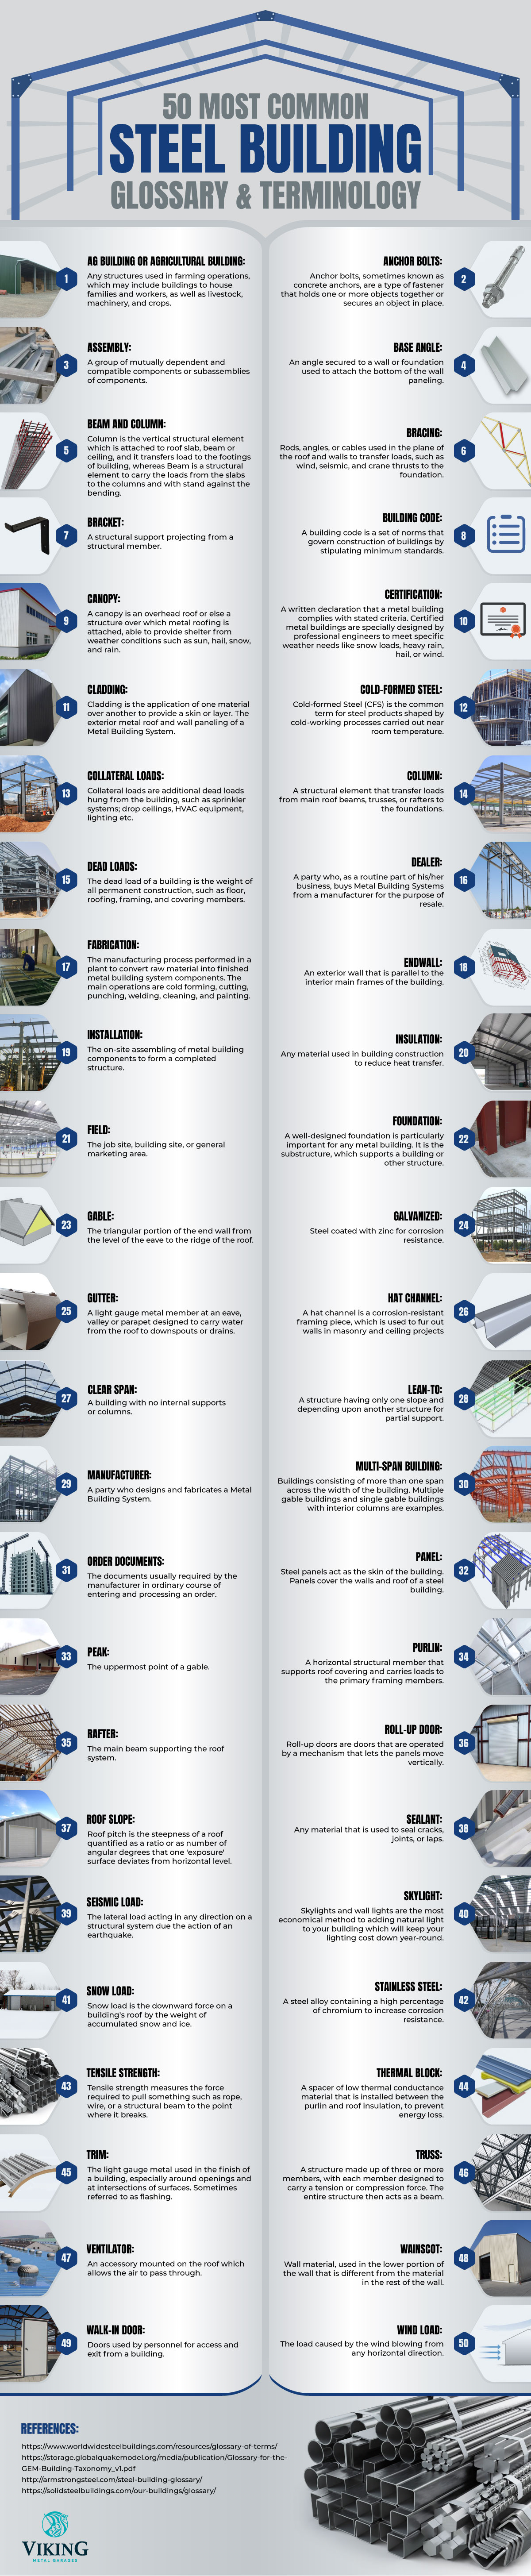 50 Most Common Steel Building Glossary & Terminology